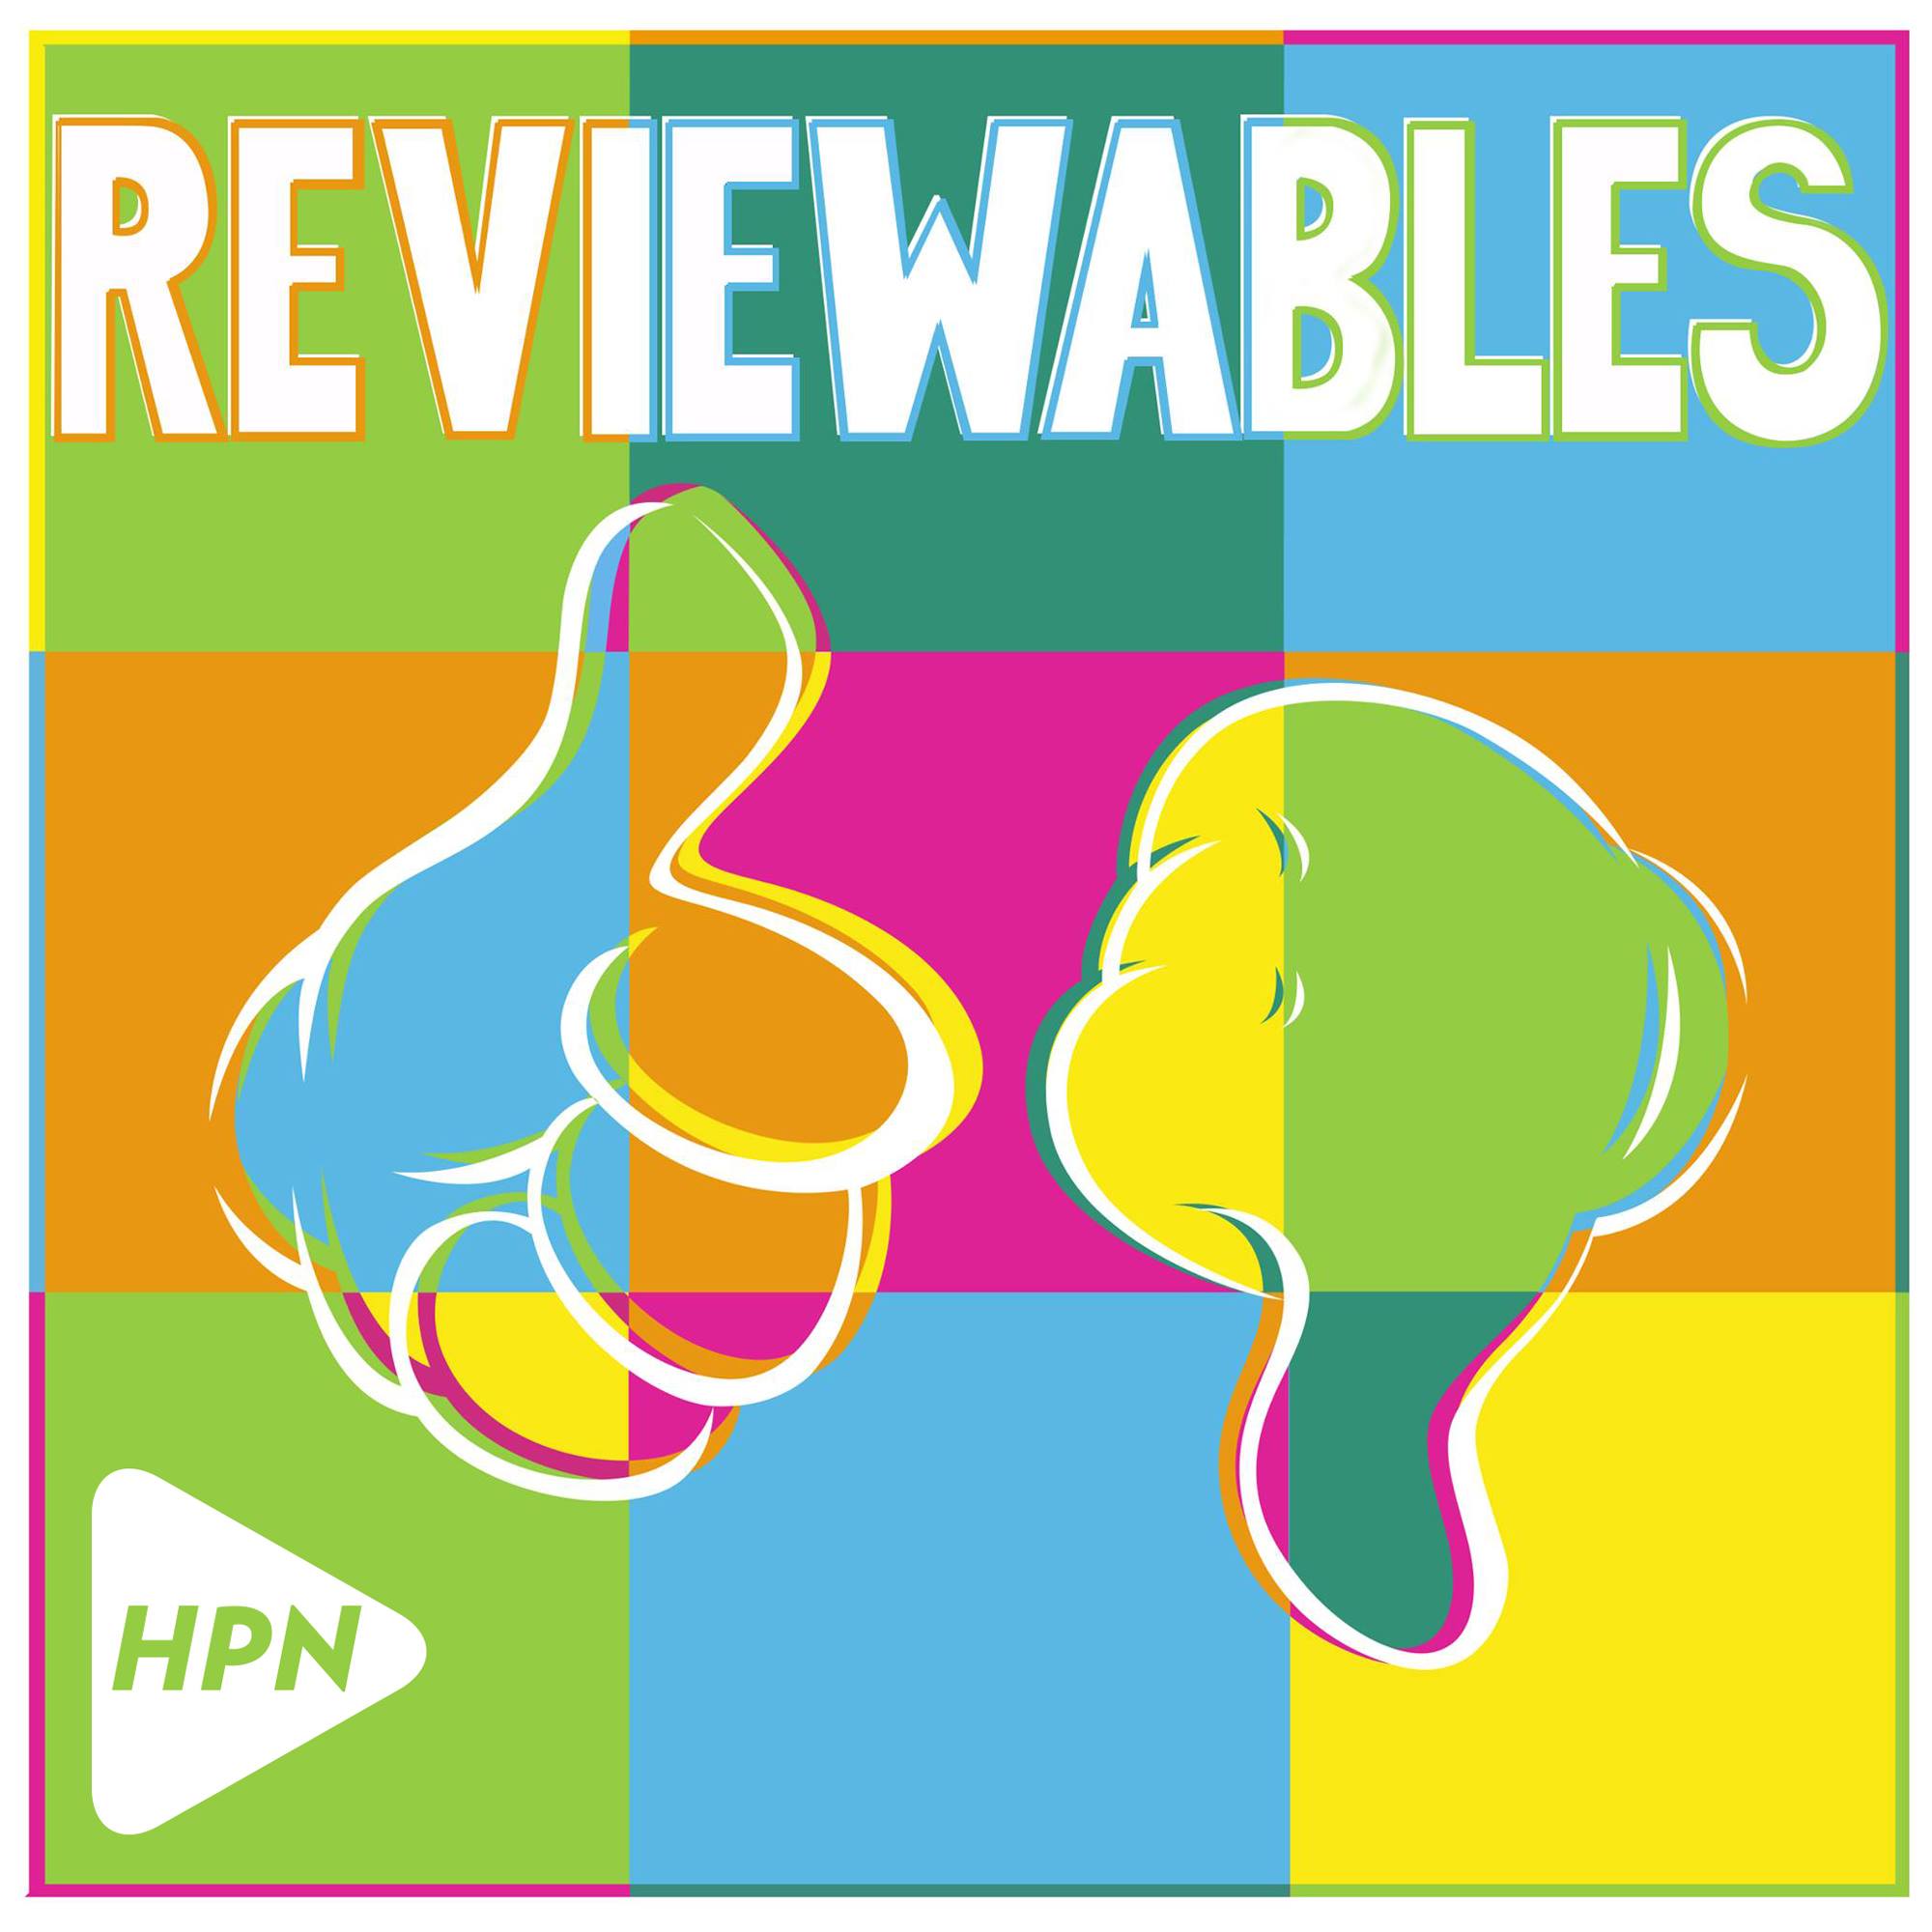 Reviewables Podcast on HeadStuff Podcast Network, comedy podcast with Cian McGarrigle and Edwin Sammon - HeadStuff.org